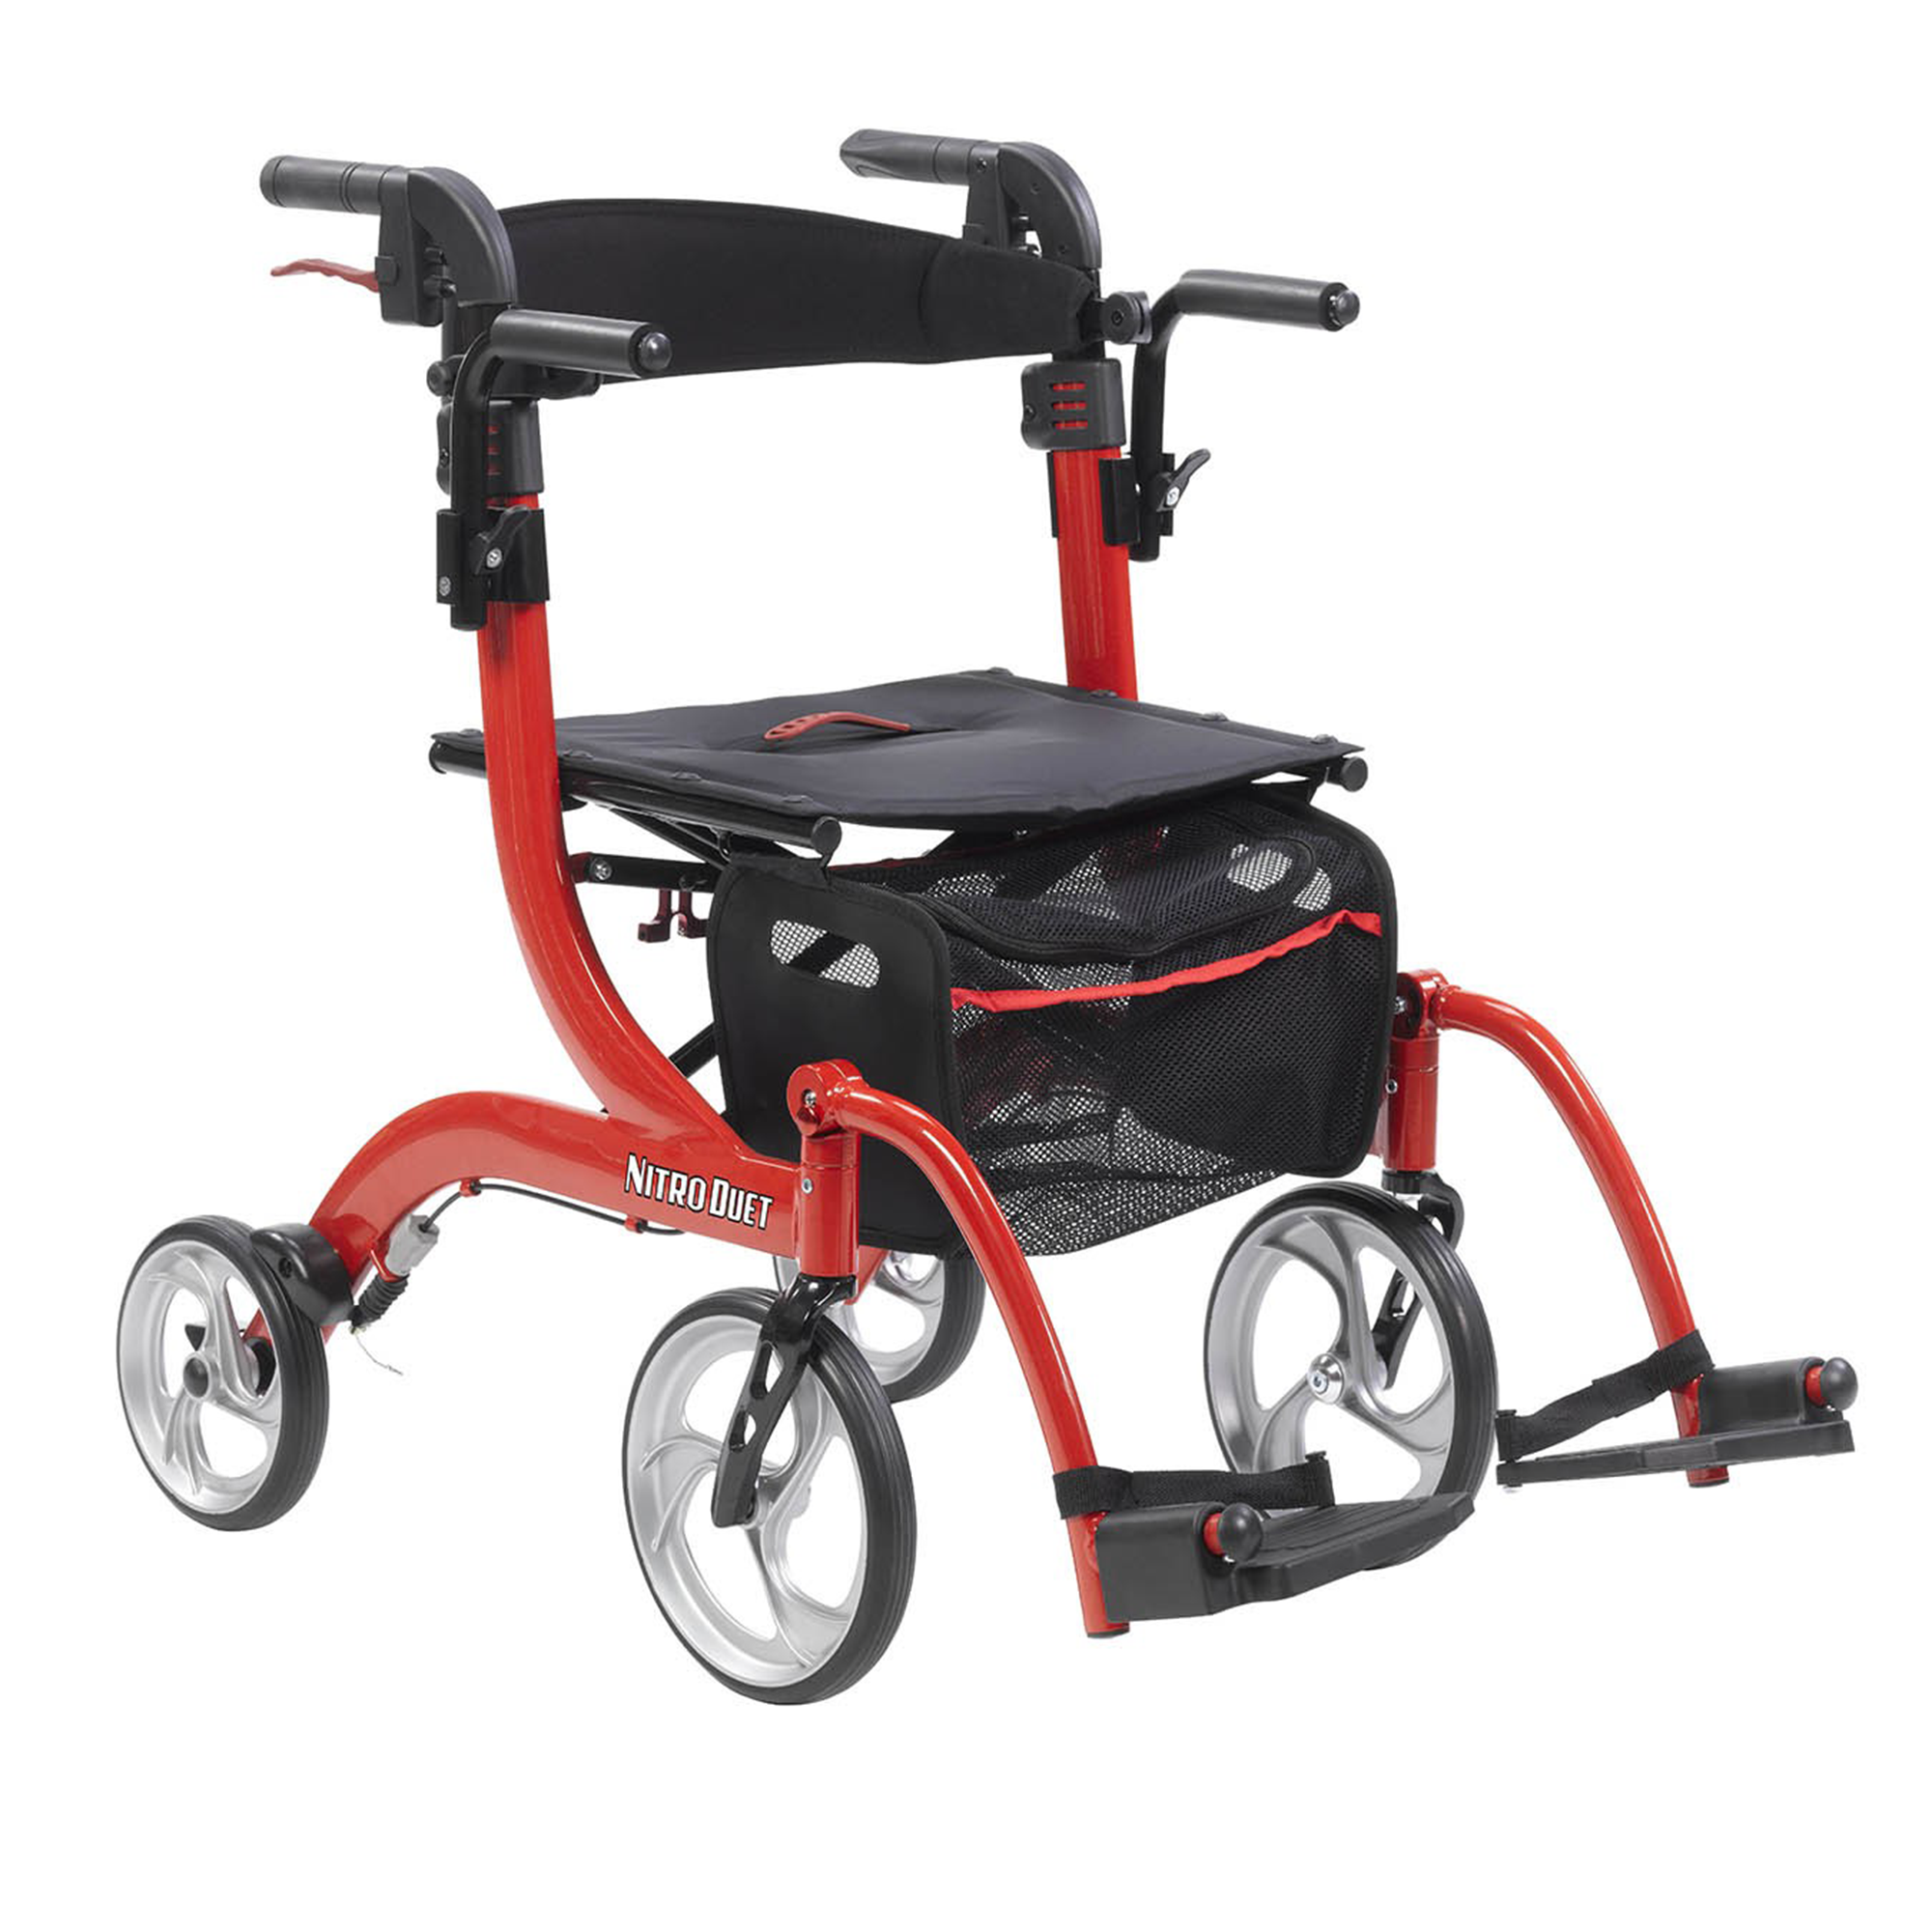 Nitro Duet Rollator and Transport Chair - Transport chair position